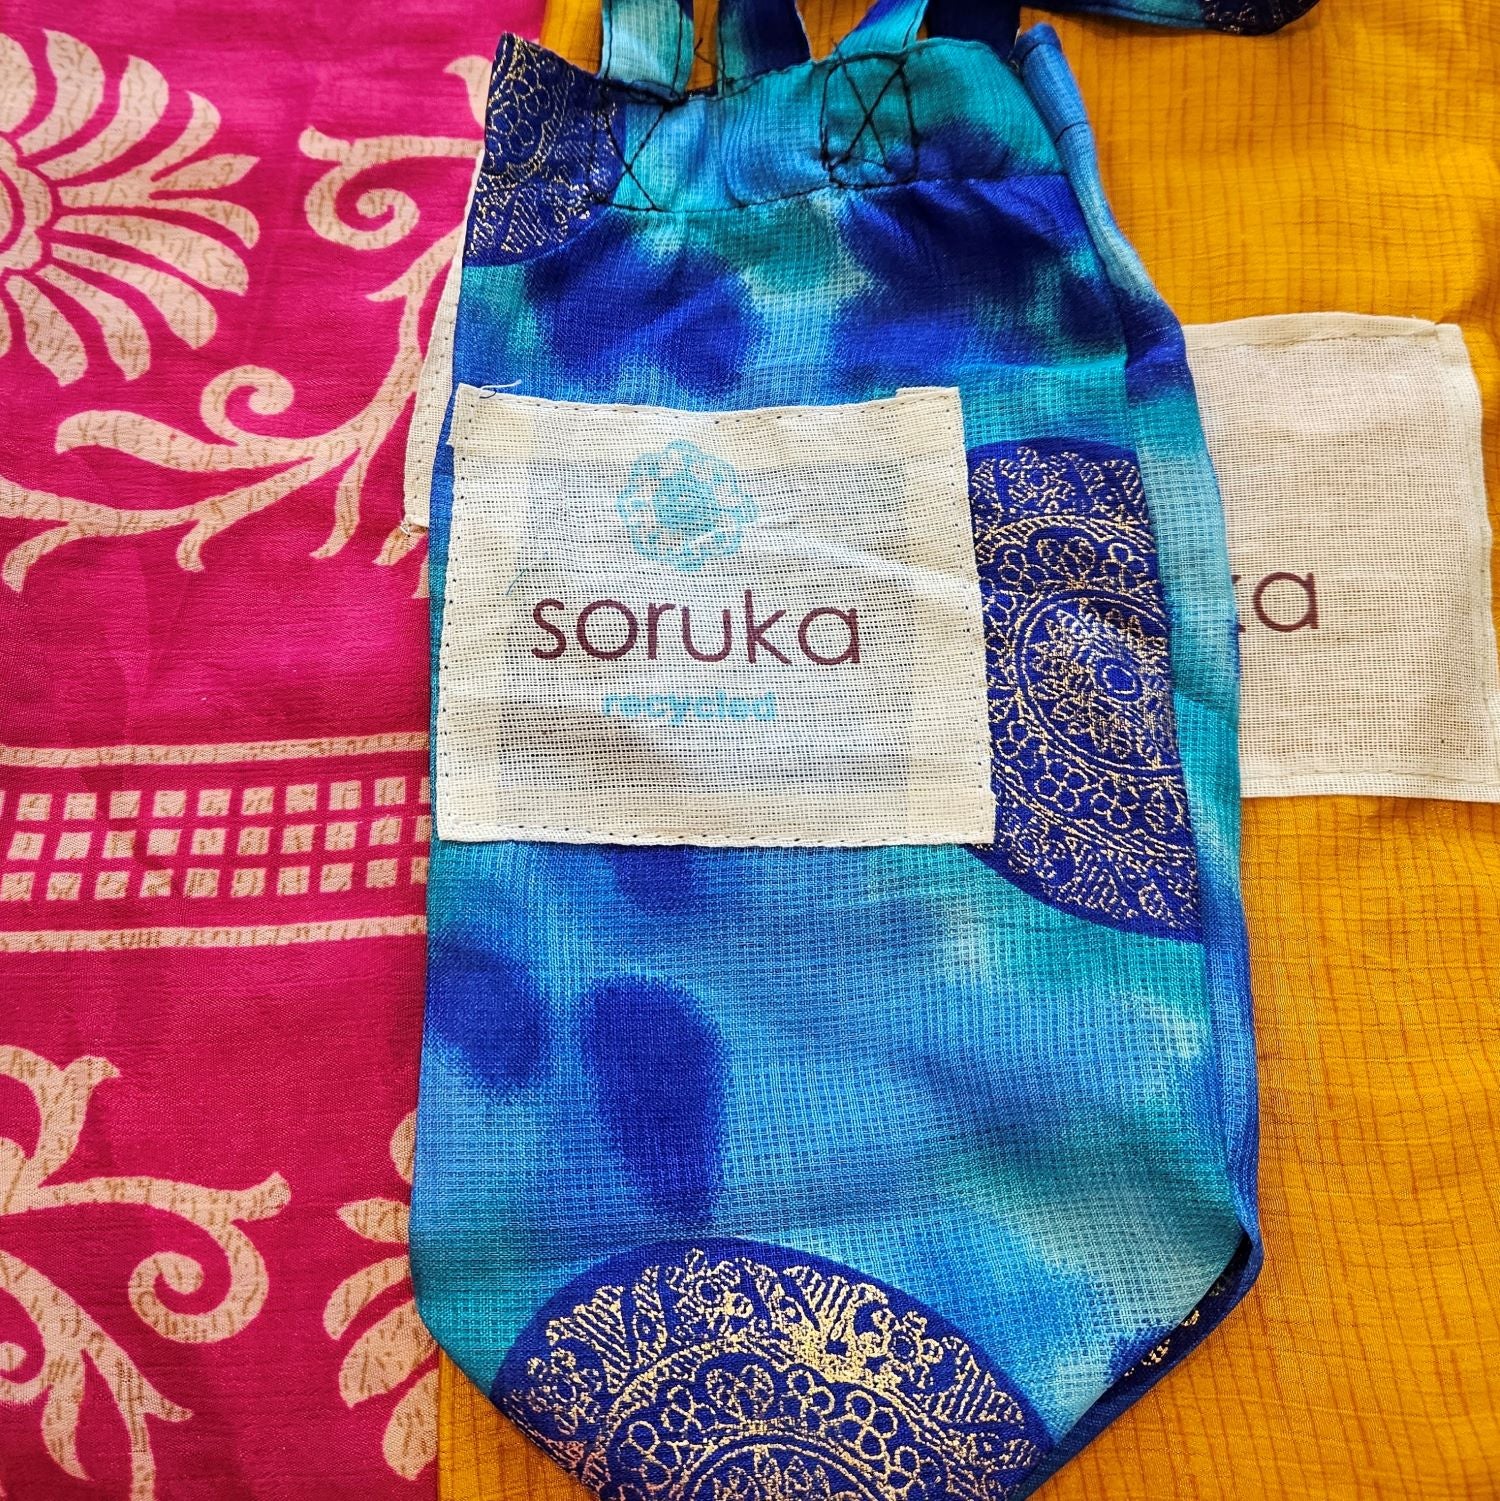 The Maya Soruka Handbag  provides a slim and attractive design with zip pockets to keep valuable items secure and accessible. With an adjustable strap, an inner pocket, and the ability to wear as a shoulder bag or cross body, it is the ideal accessory for any occasion.  Each Soruka bag and large purse comes to you in a beautiful recycled Sari gift bag.  L:18cm x H:21cm